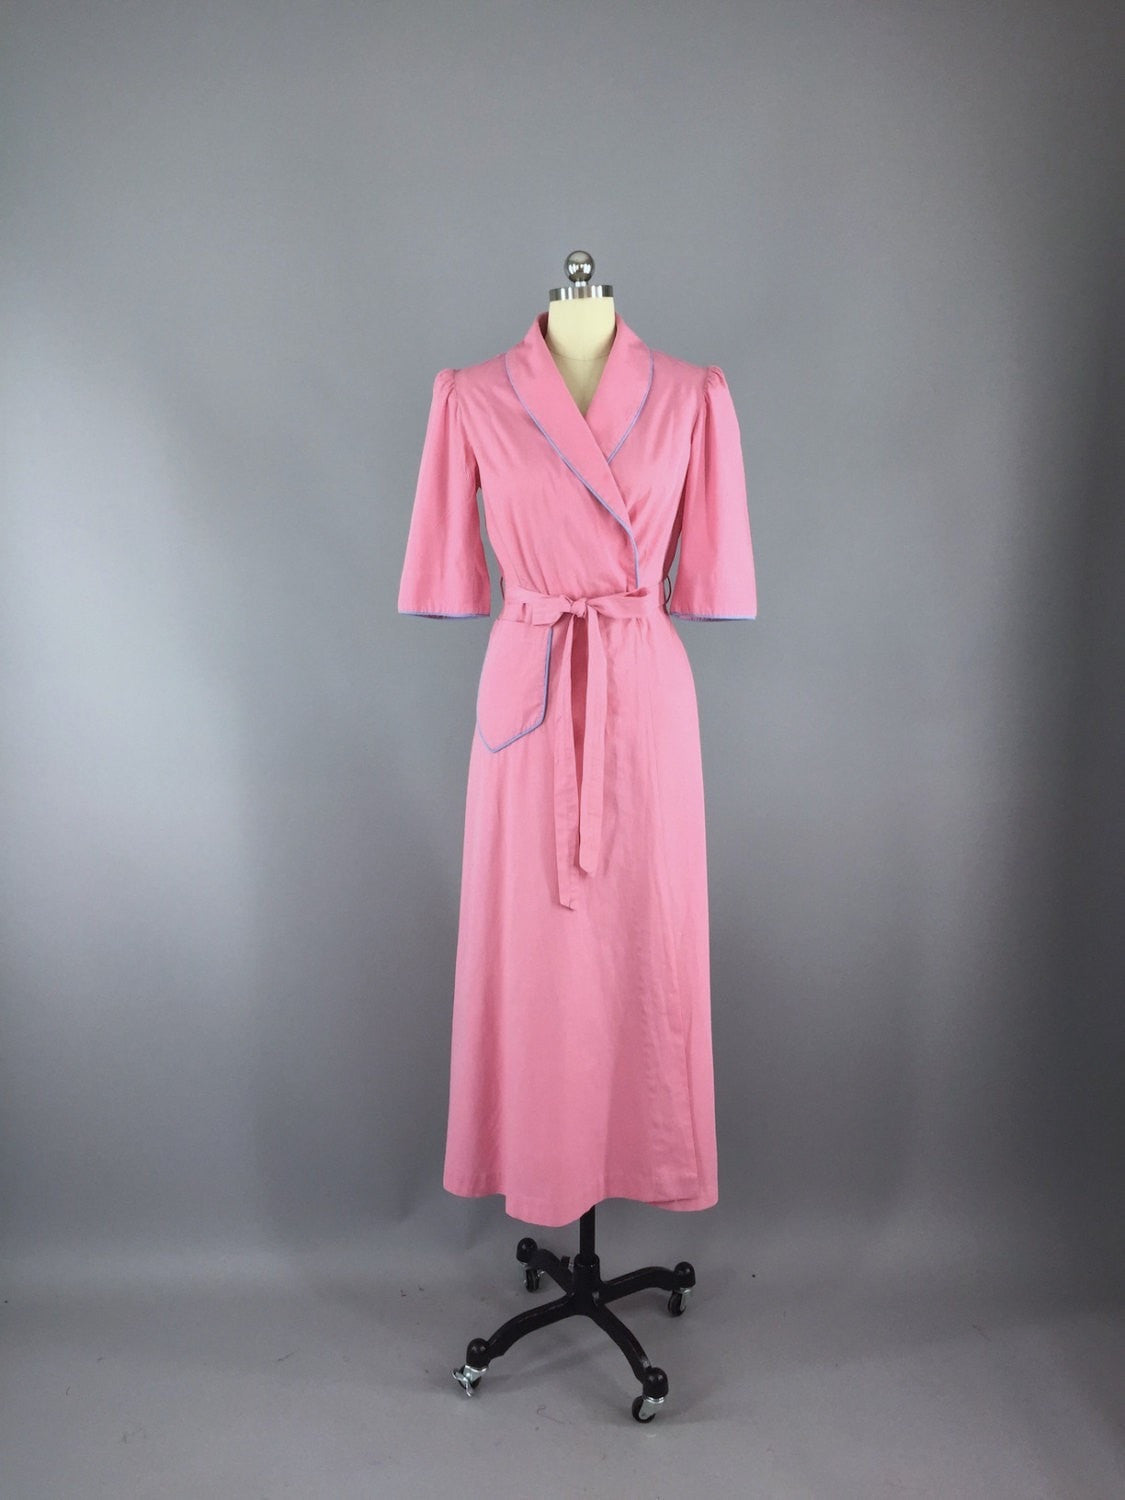 Vintage 1940s Candy Pink Cotton Robe - ThisBlueBird